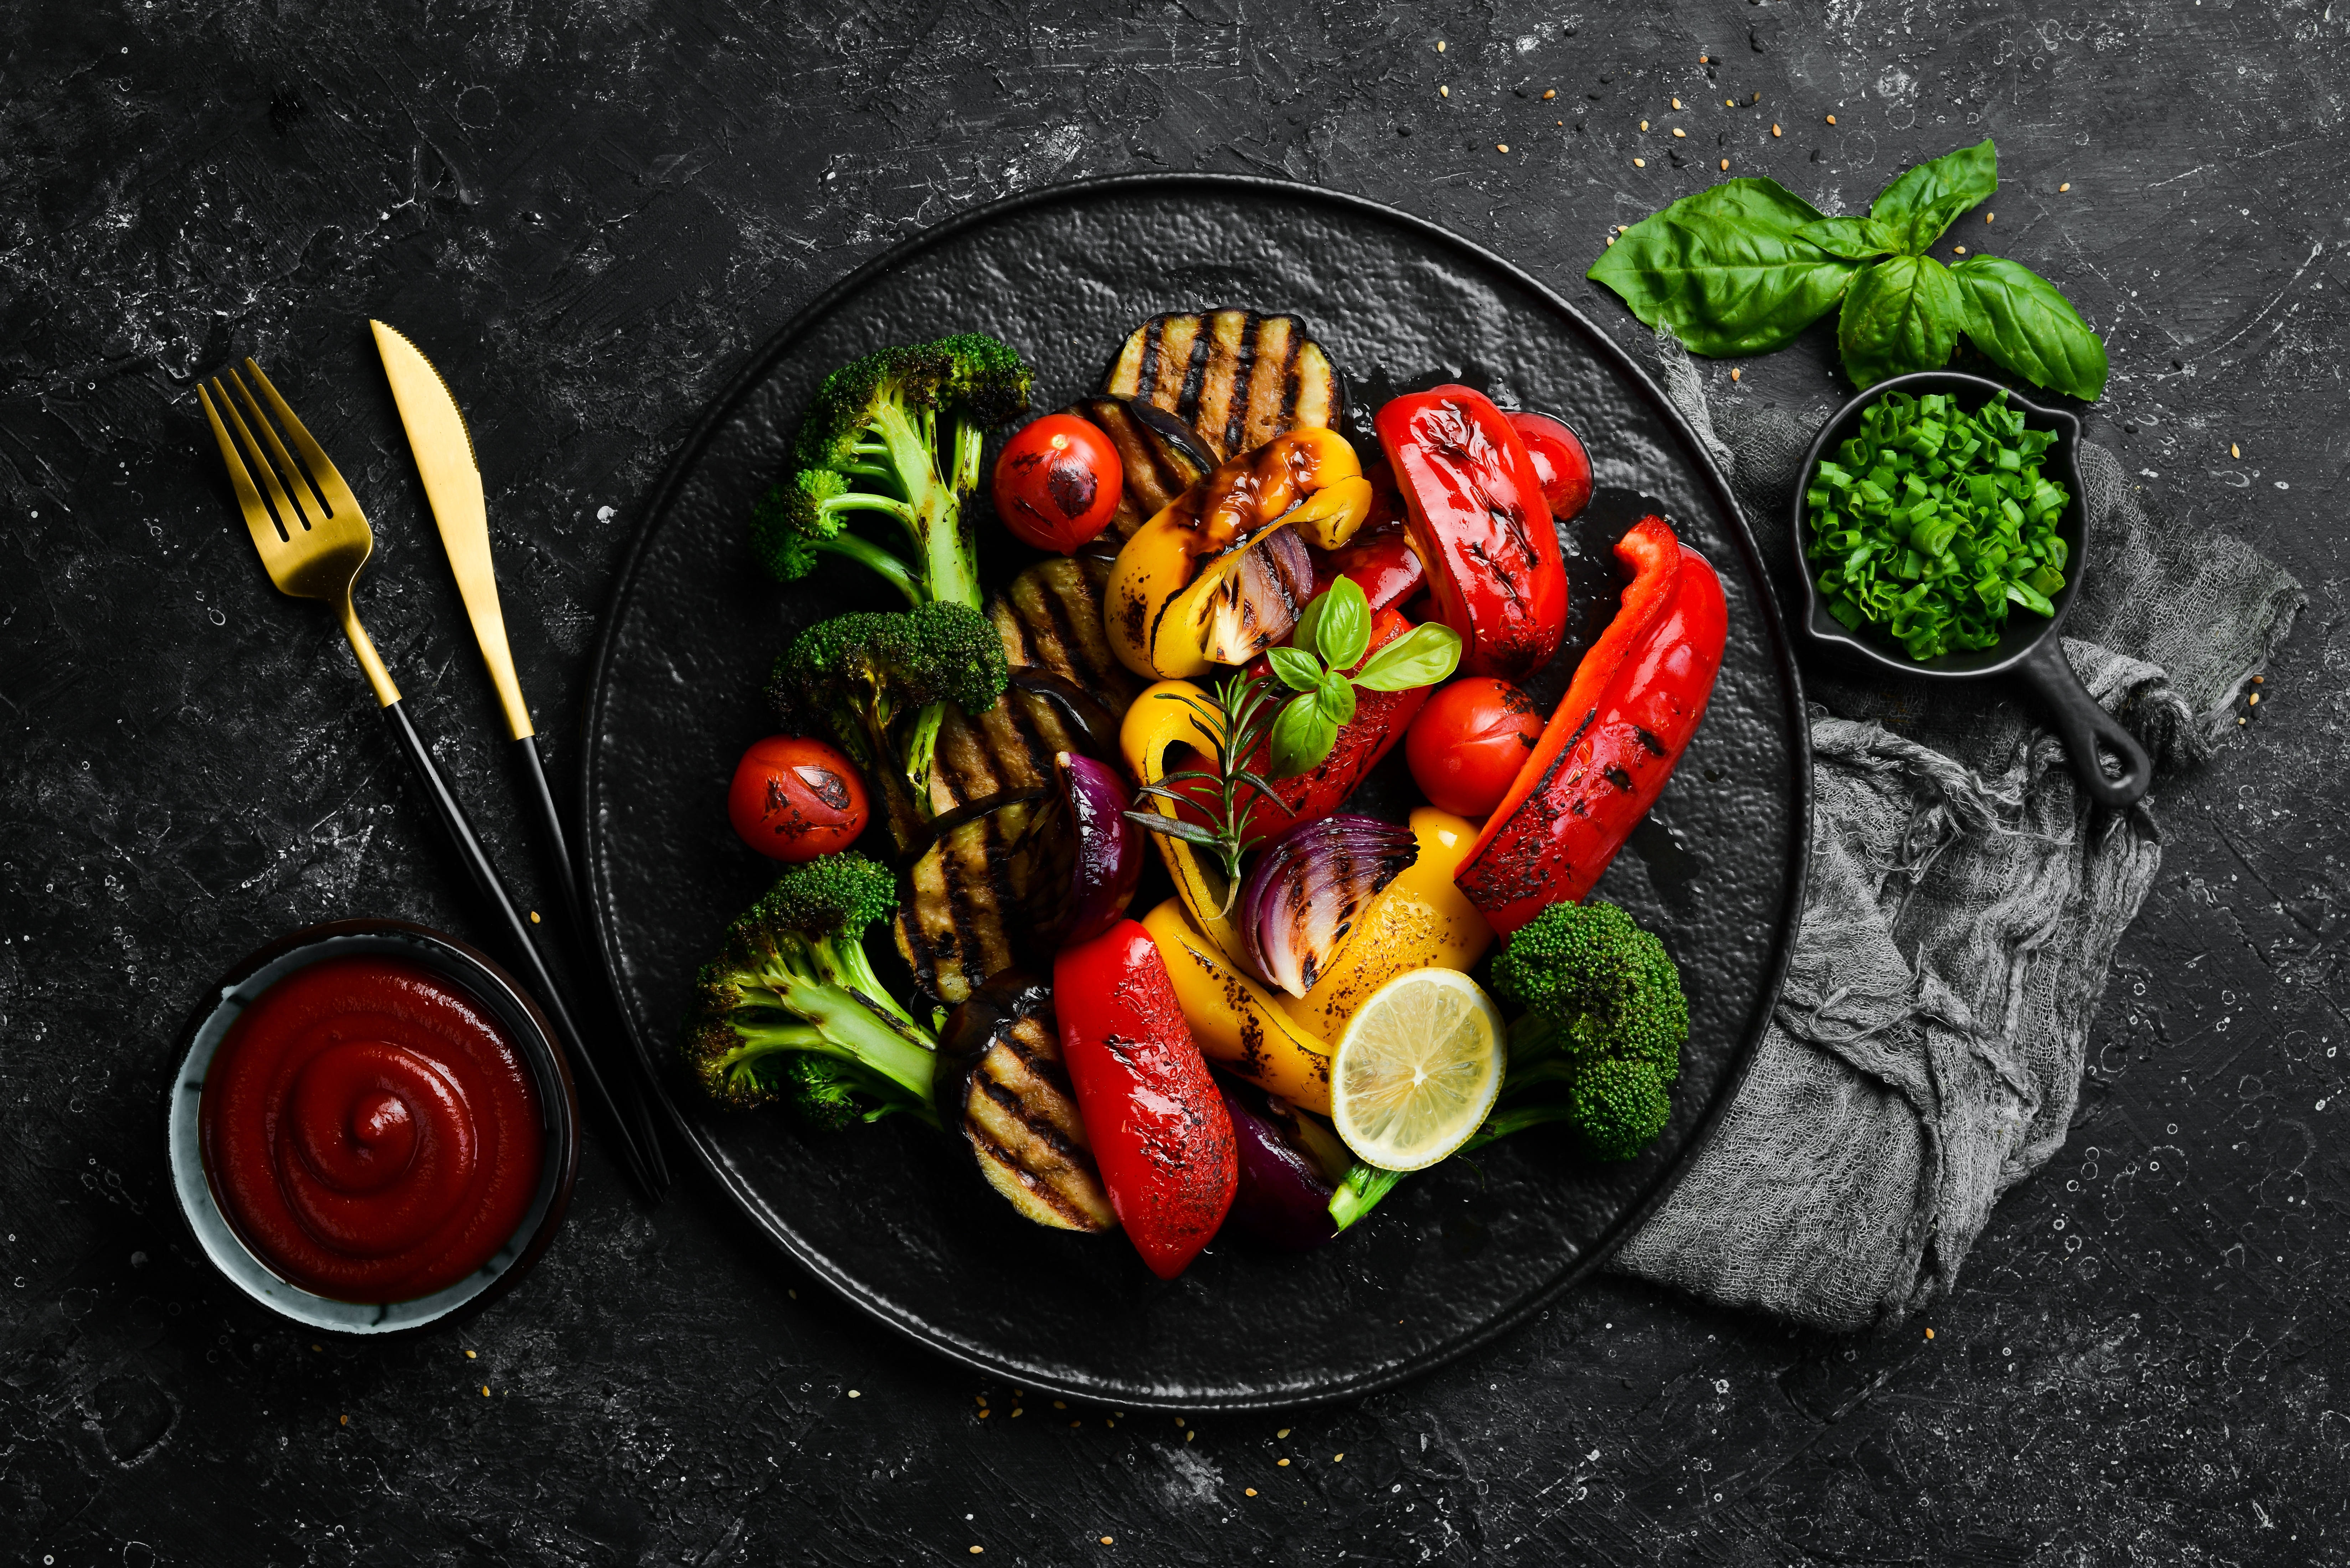 A plate of grilled vegetables is a great way to add more veggies (and, therefore, vitamins, minerals, and antioxidants) to your diet